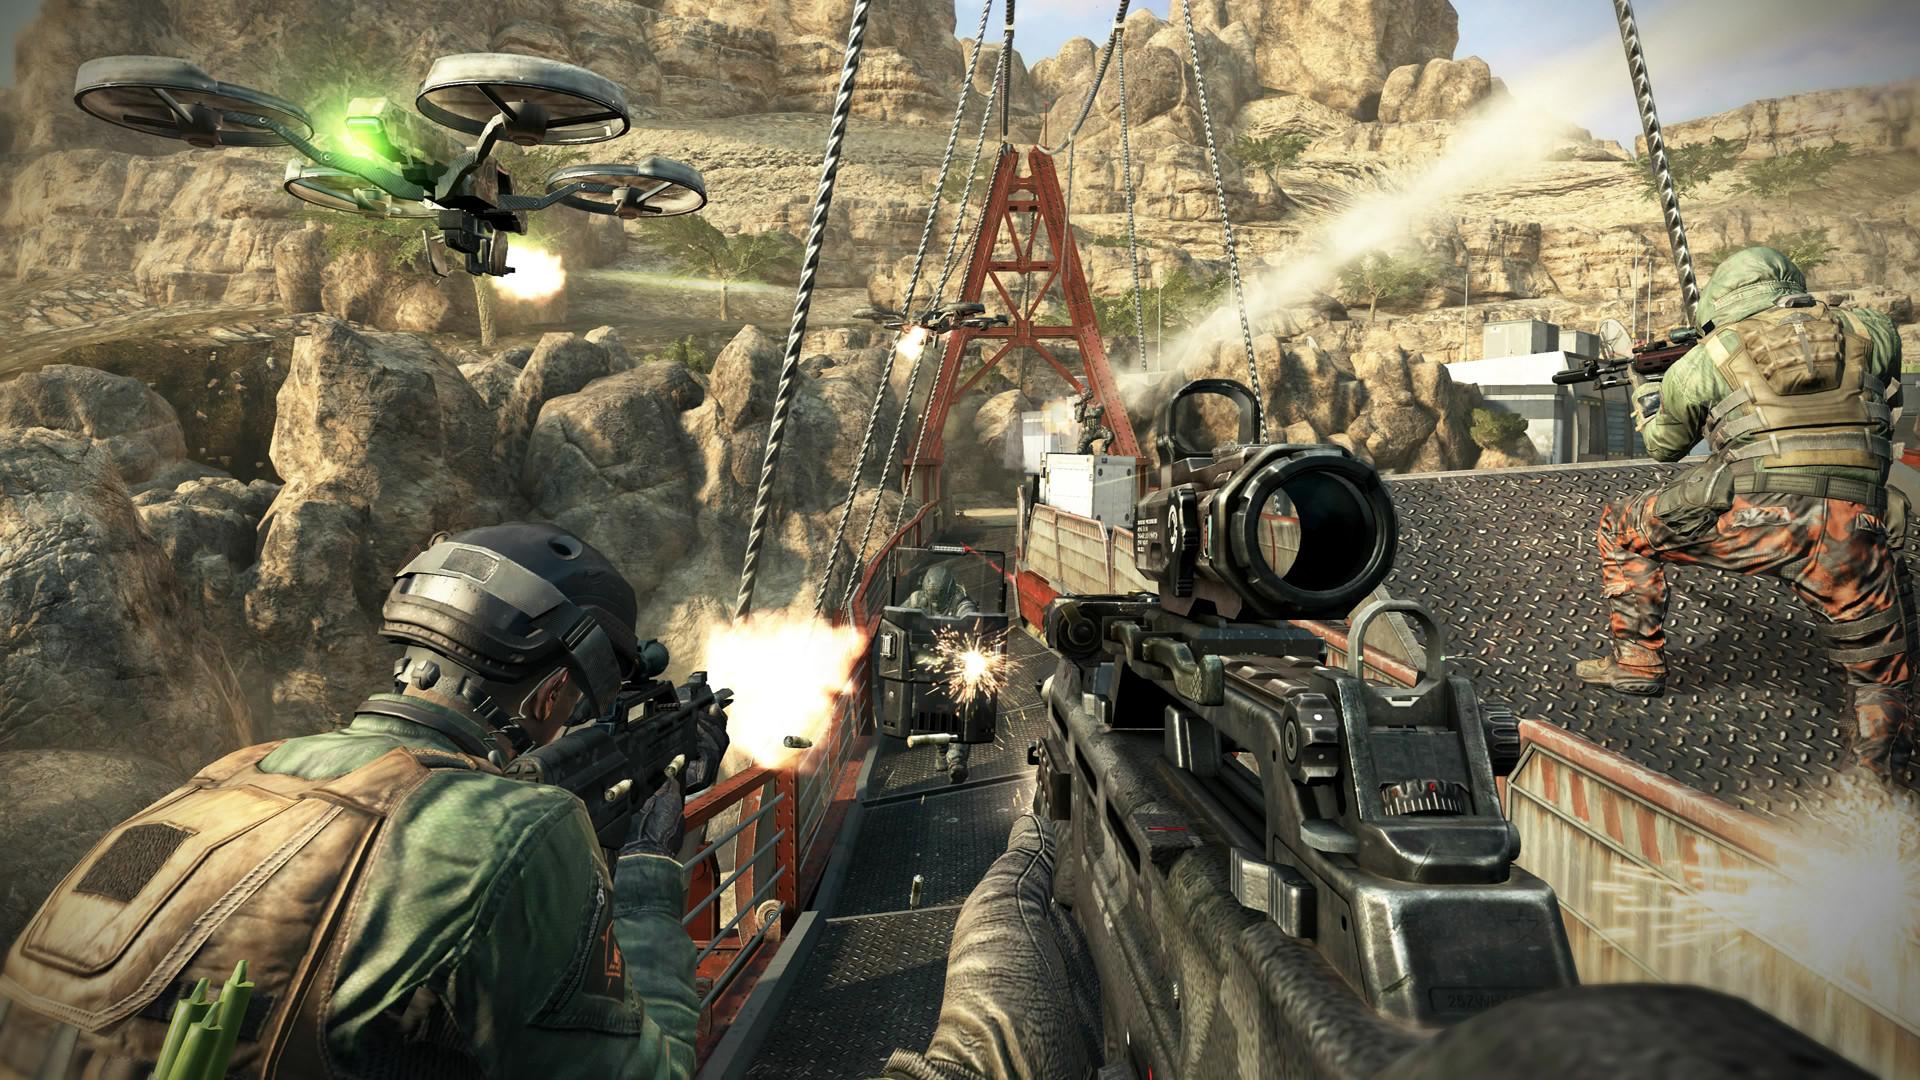 Awesome Call Of Duty Black Ops 2 Picture. Call Of Duty